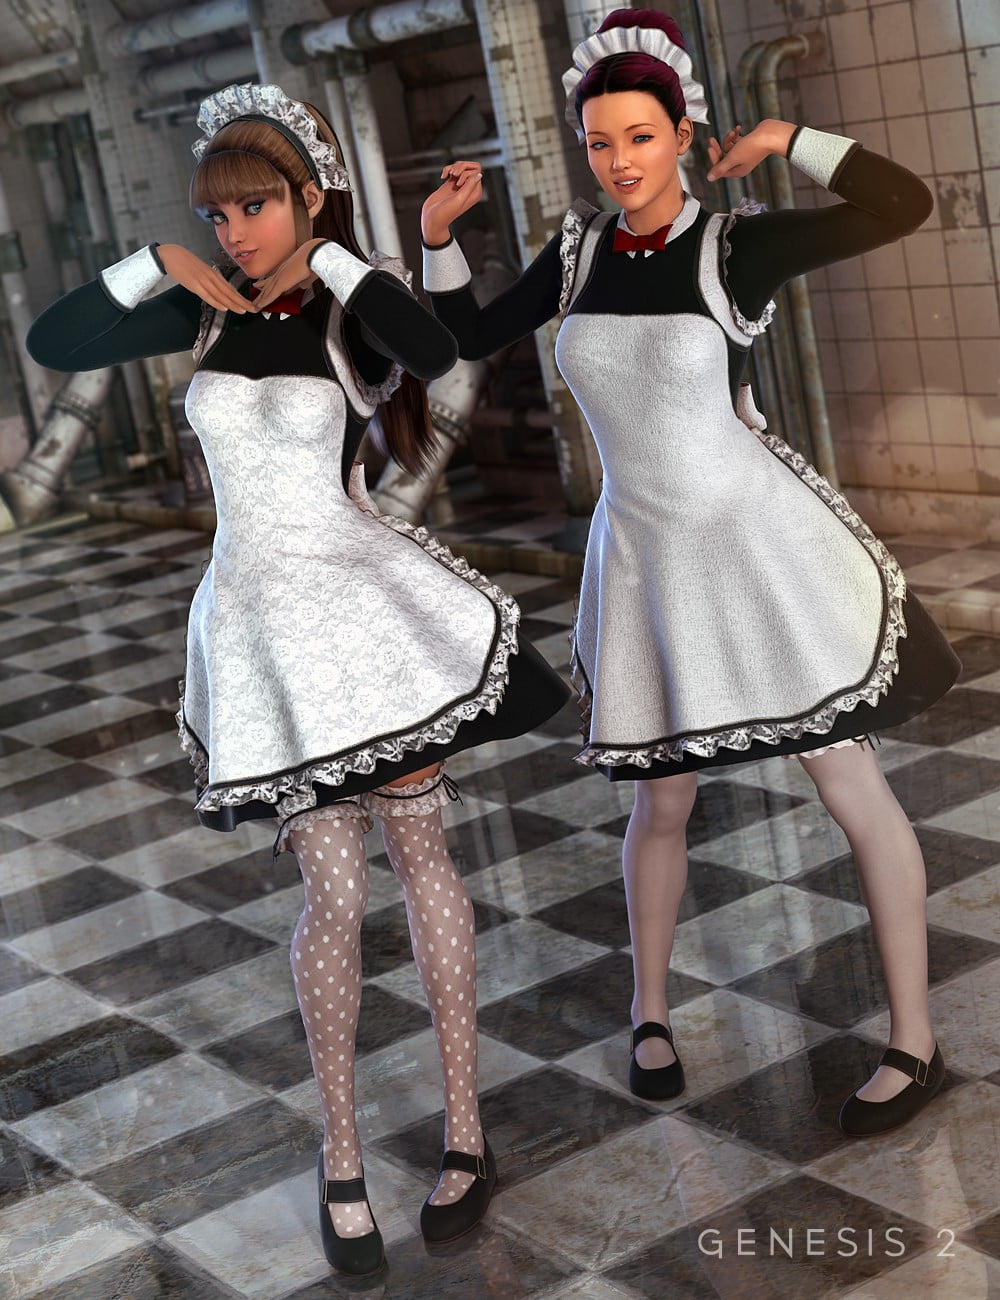 The Maid Outfit For Genesis 2 Female S 3d Models For Daz Studio And